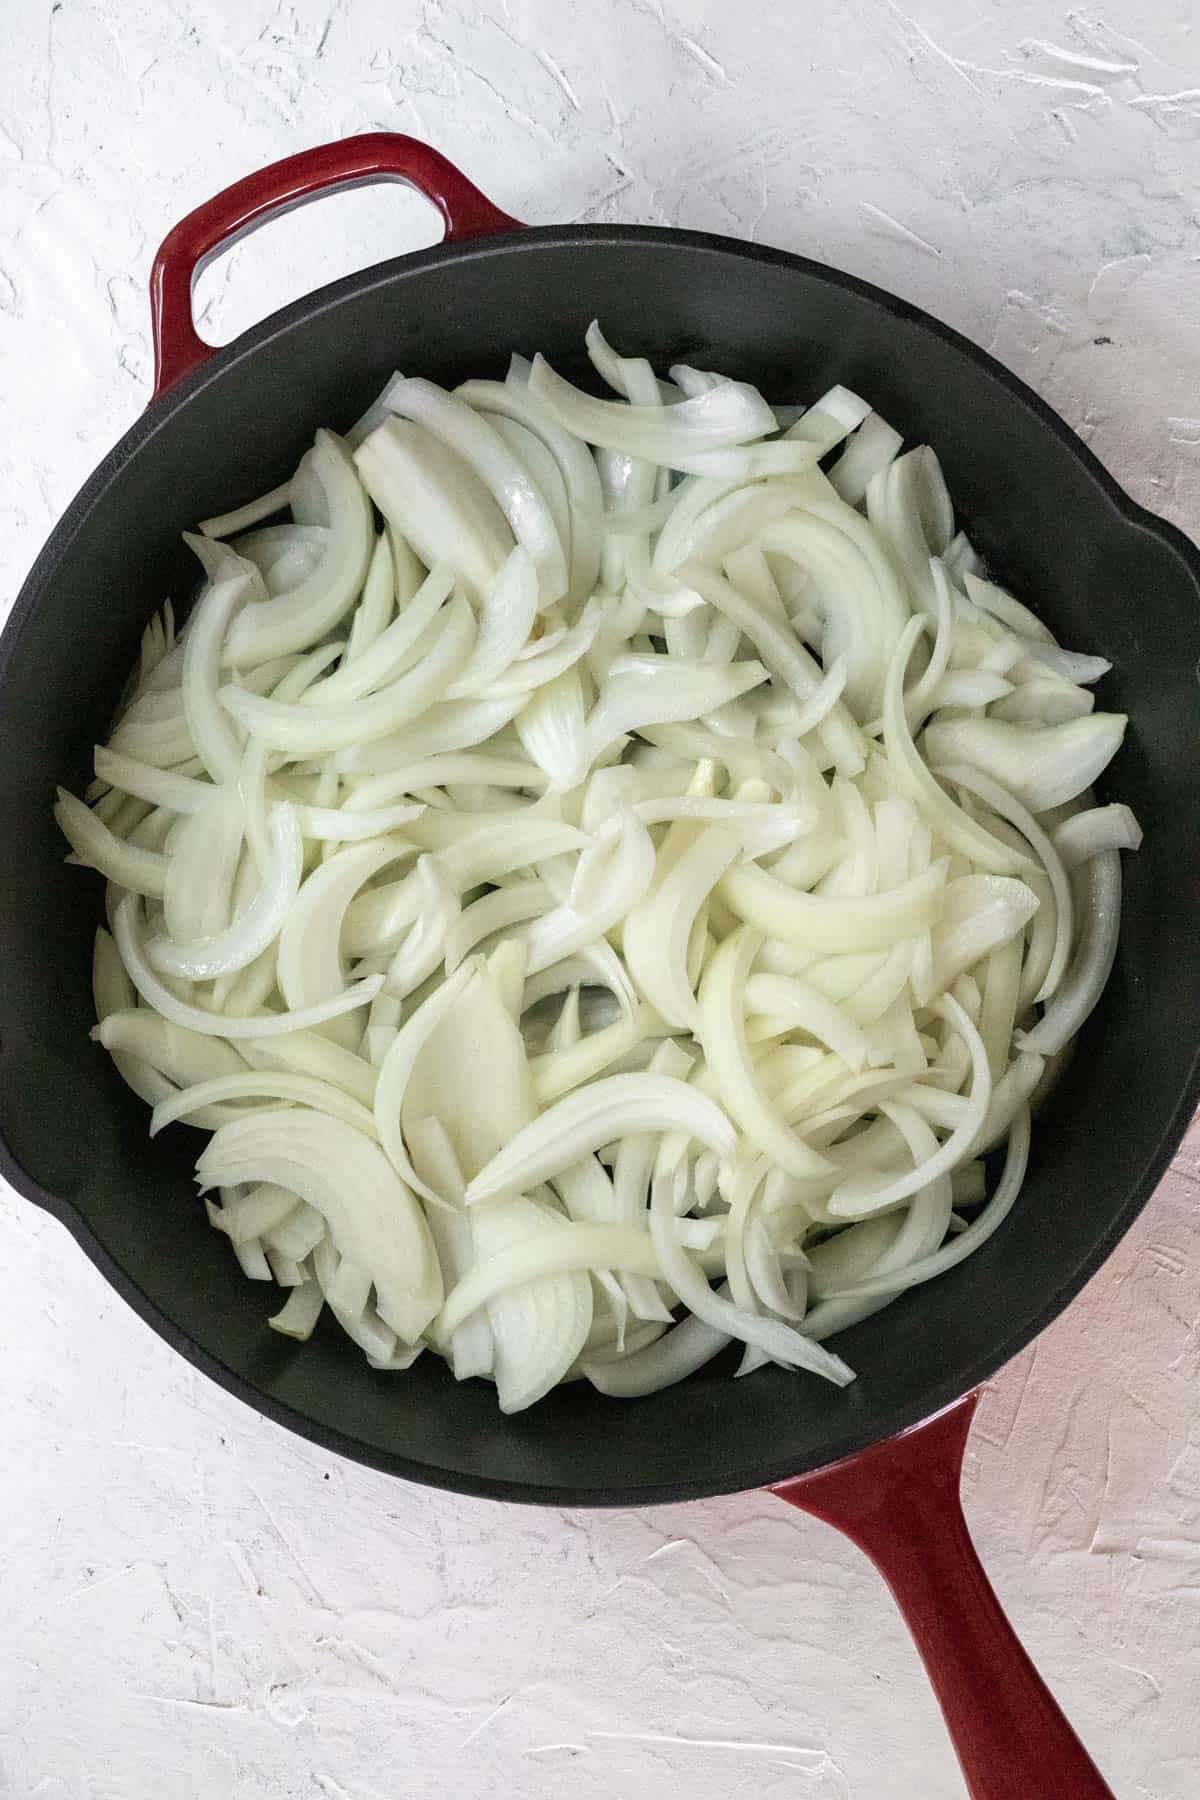 Raw sliced onions in a cast iron skillet before caramelizing.